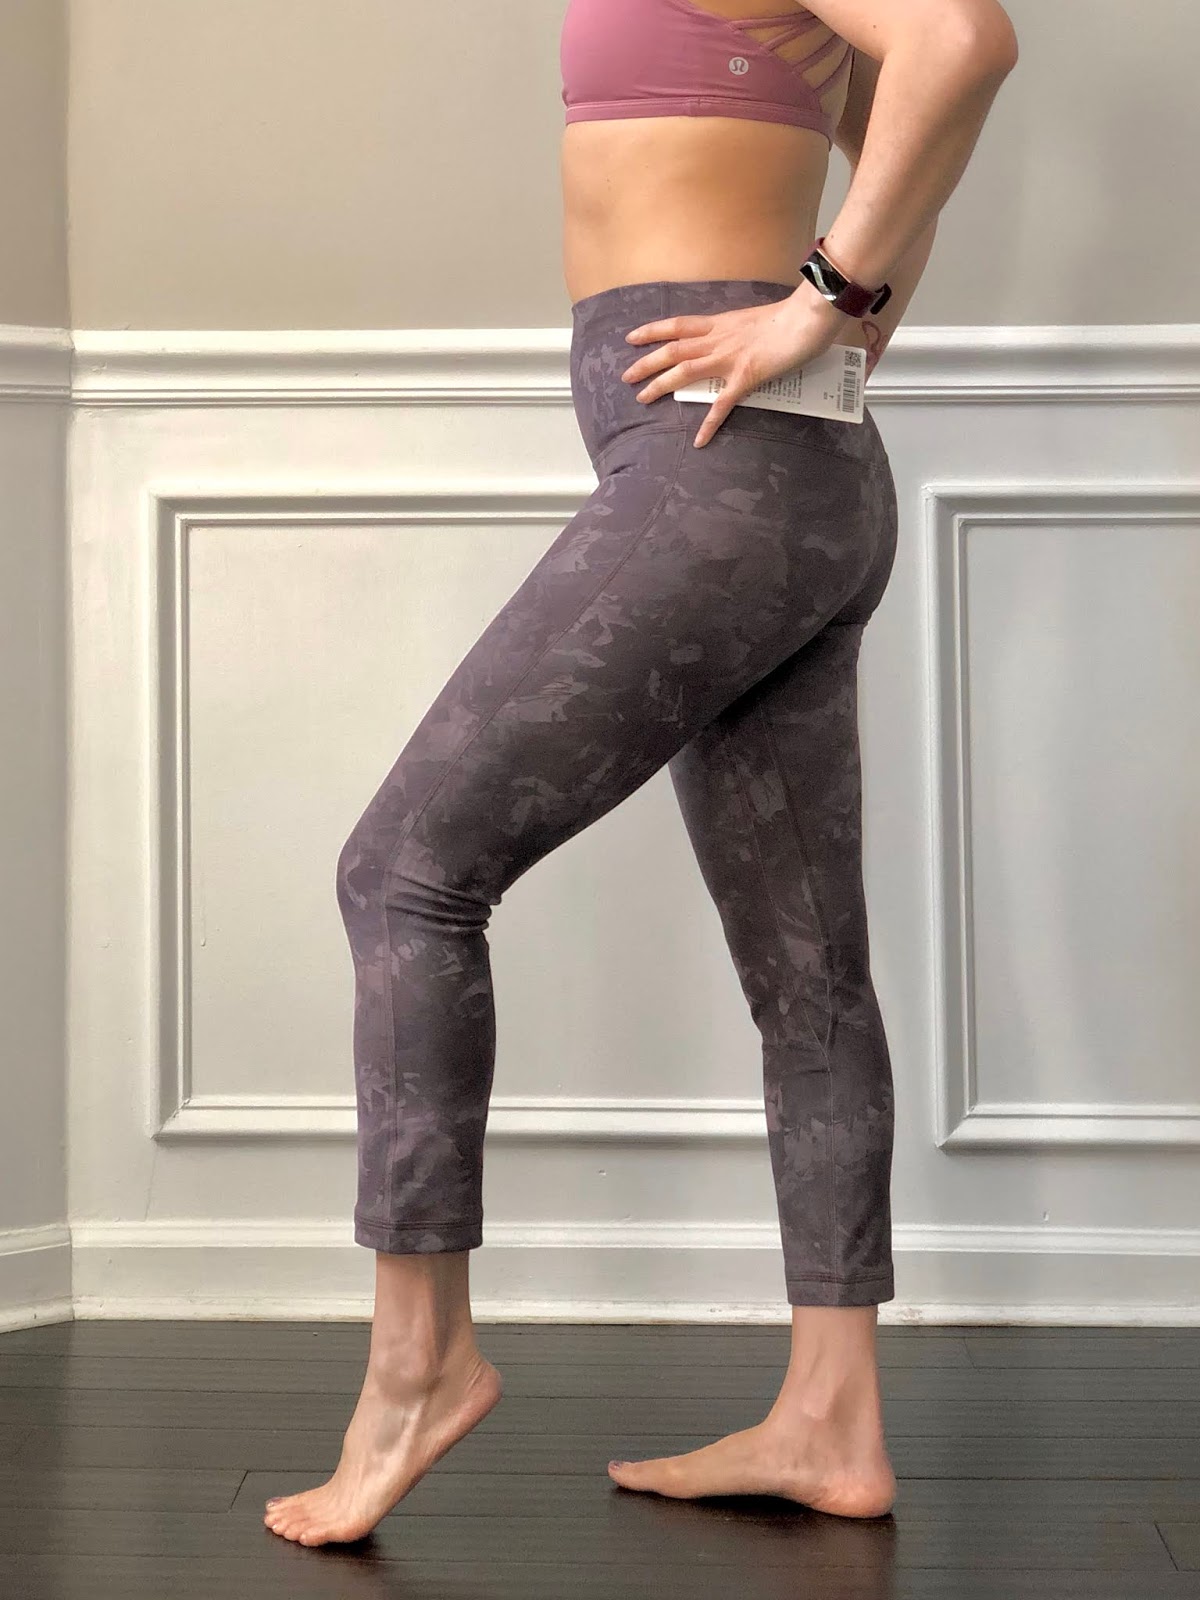 These leggings are the diamond dye pitch grey graphic grey in size 2.